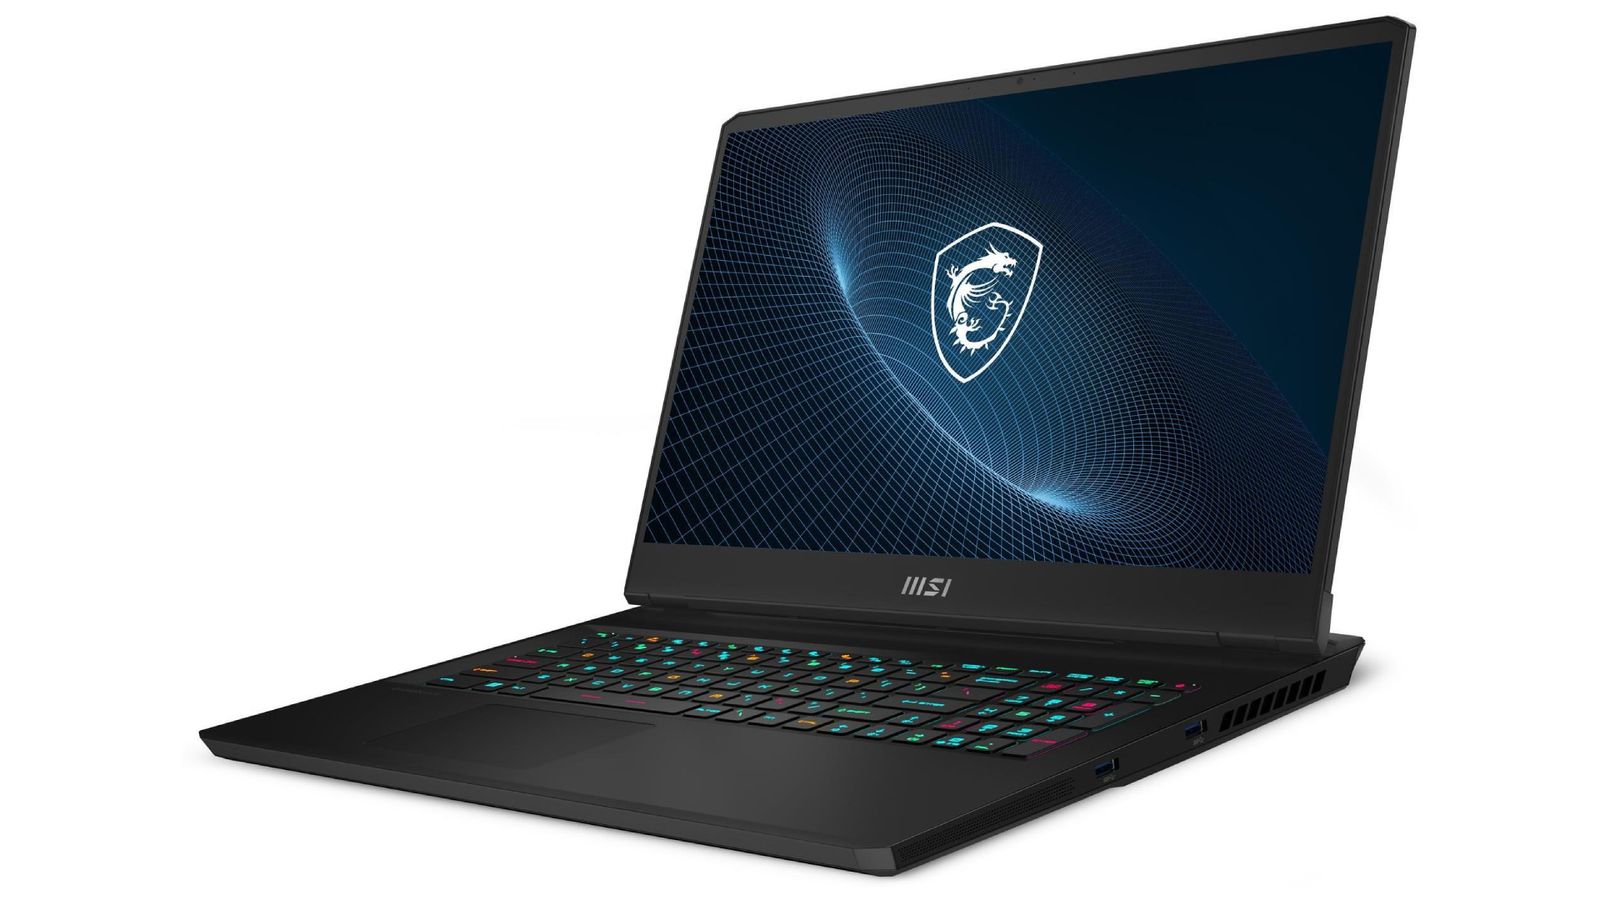 Best Diablo 4 gaming laptop - MSI Vector GP76 product image of a black laptop with multicoloured backlit keys and blue MSI branding on the display.